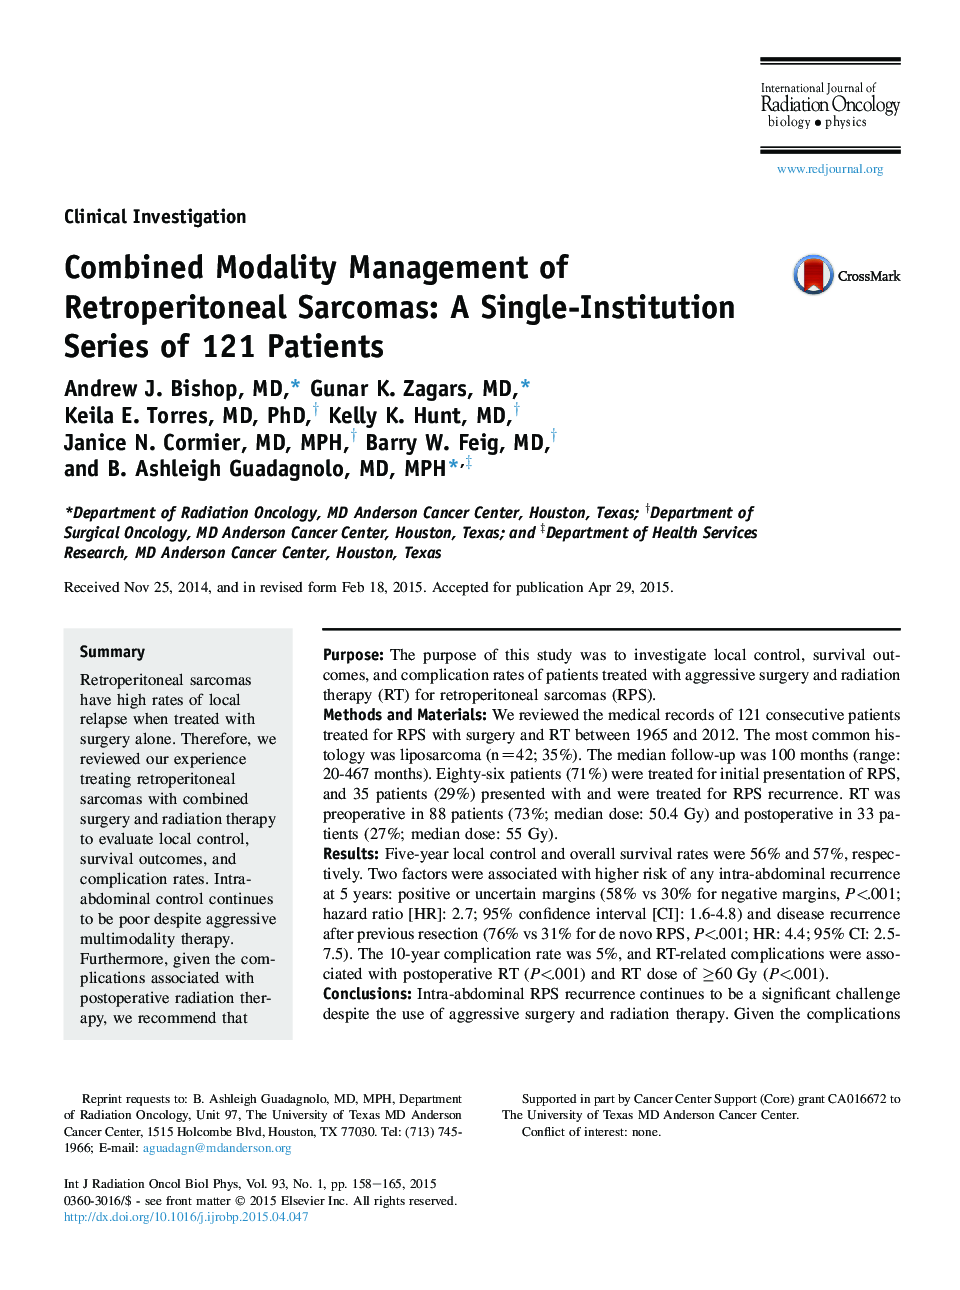 Combined Modality Management of Retroperitoneal Sarcomas: A Single-Institution Series of 121 Patients